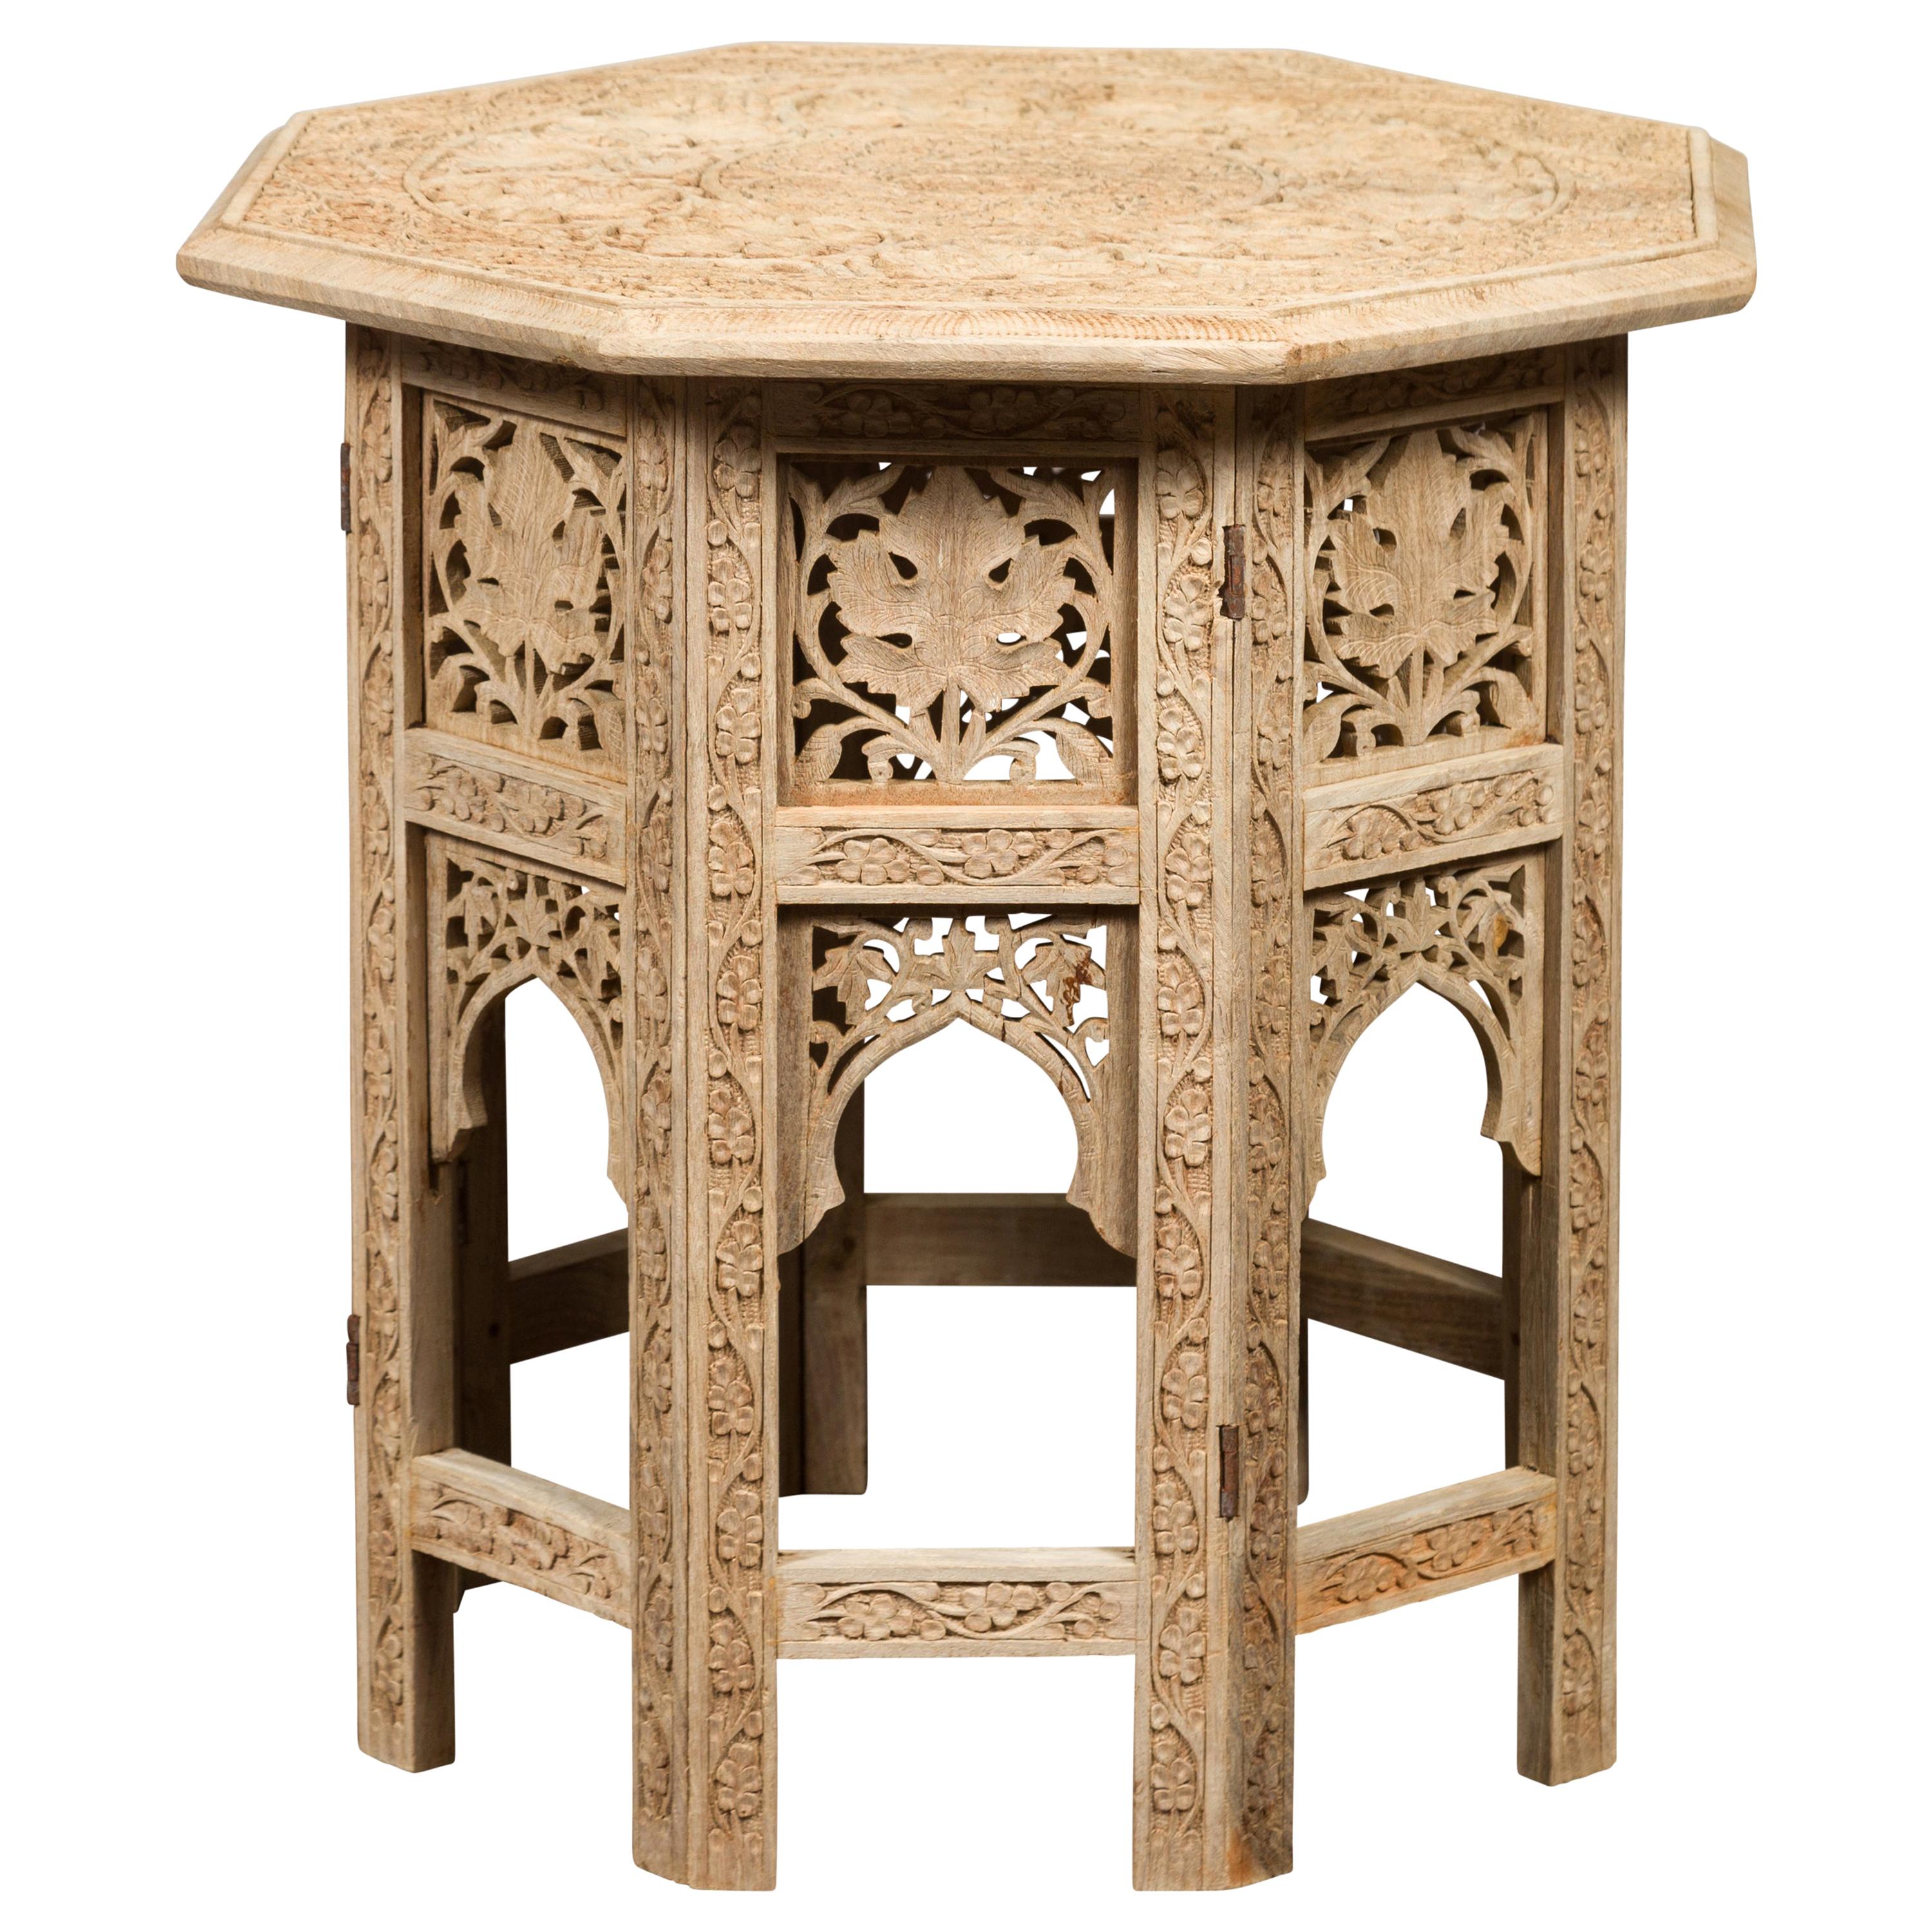 Anglo-Indian 1940s Bleached Low Side Table with Richly Carved Foliage Motifs